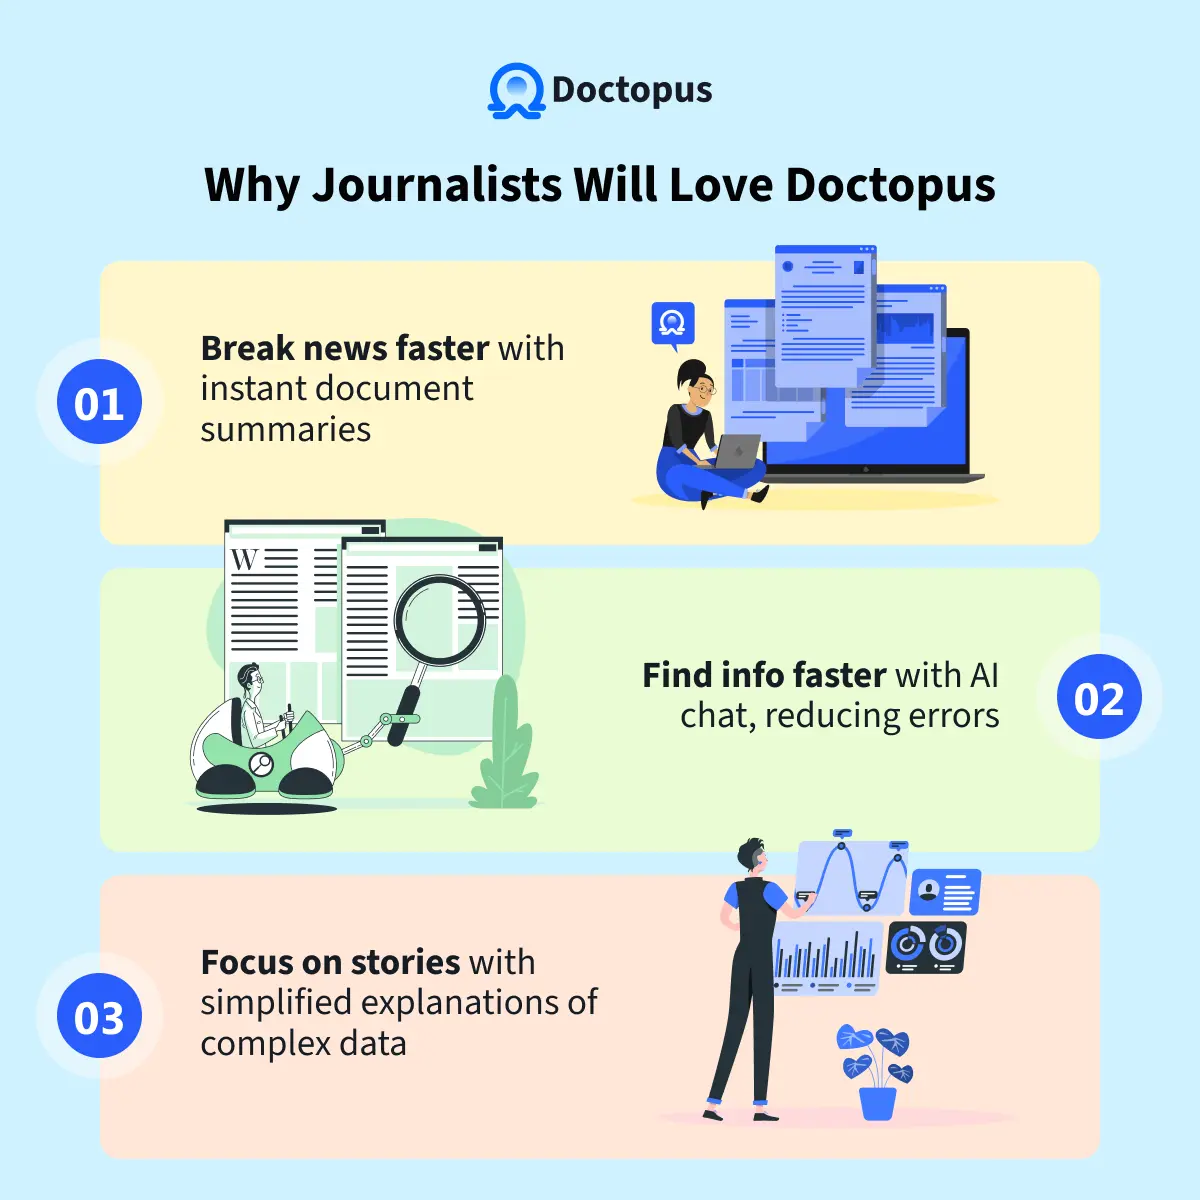 Why Journalists will love Doctopus